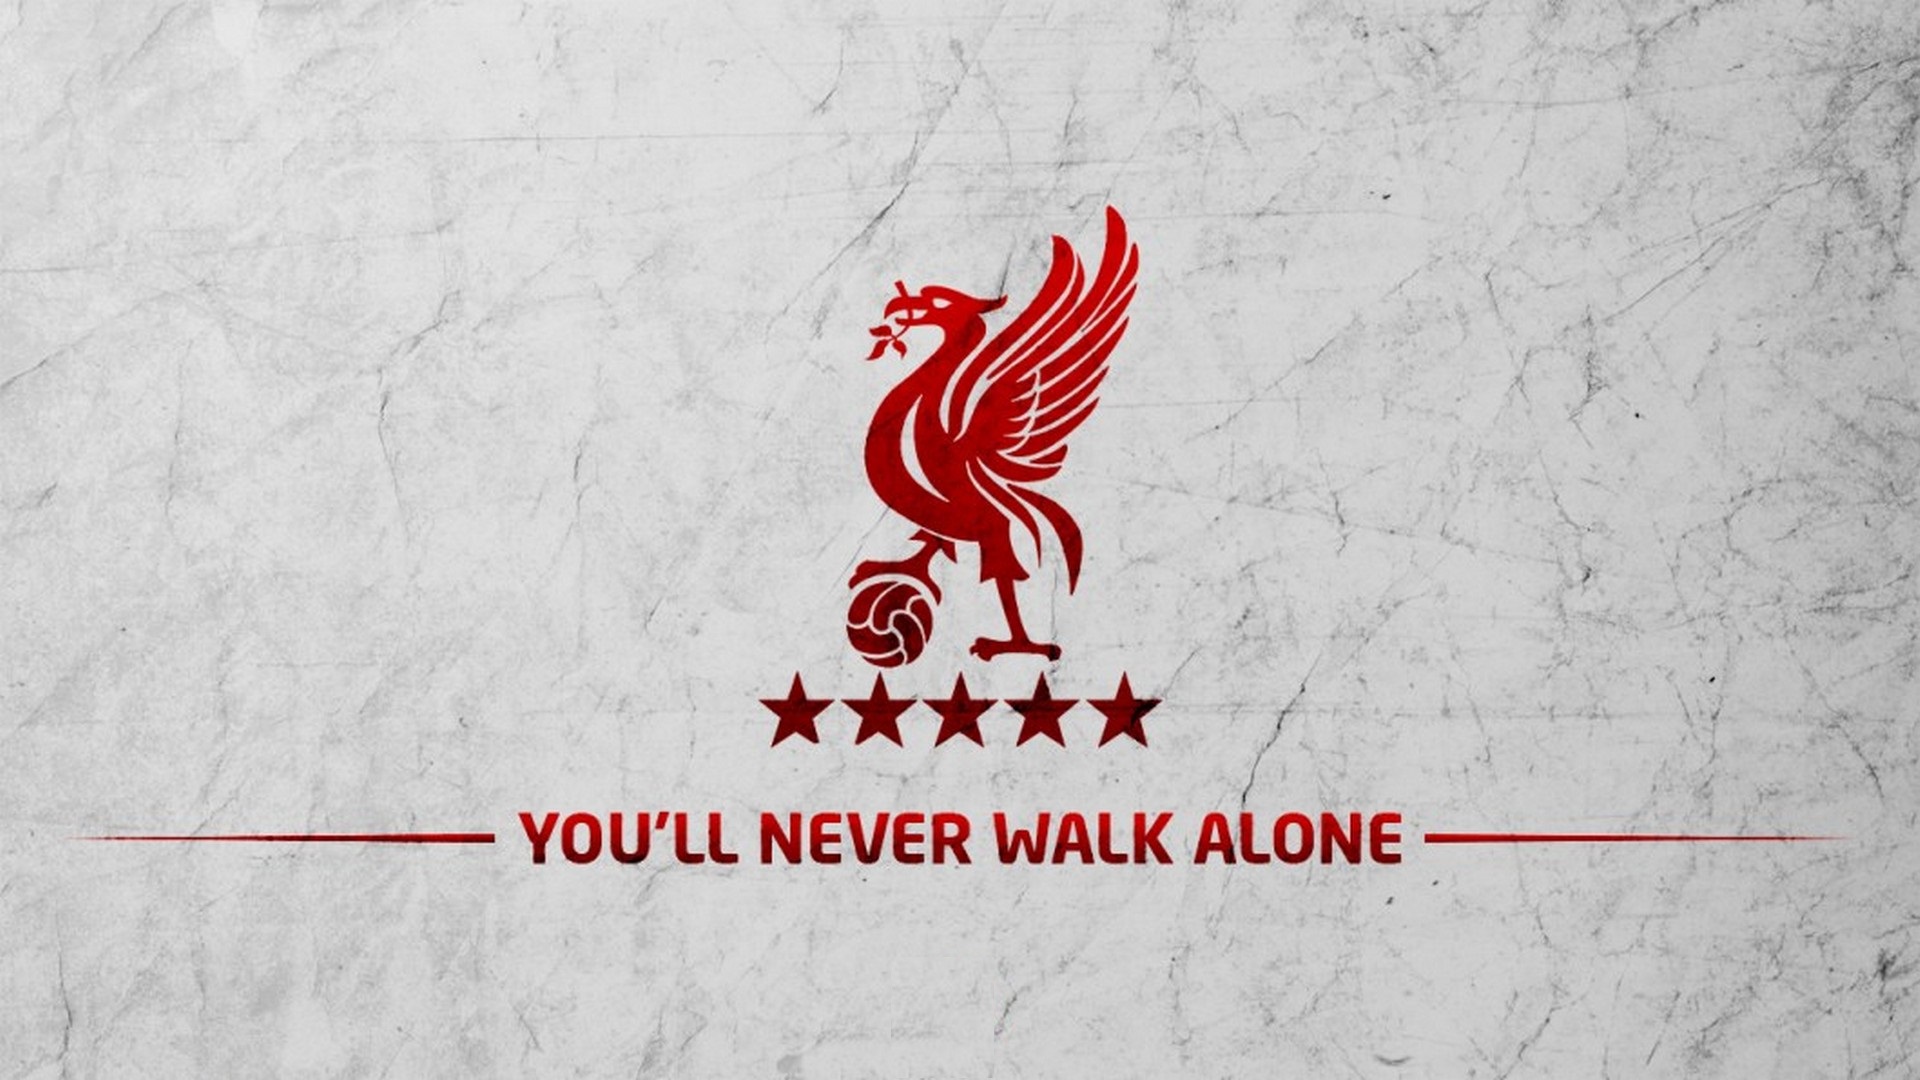 Liverpool Wallpaper For Mac Backgrounds With Resolution 1920X1080 pixel. You can make this wallpaper for your Mac or Windows Desktop Background, iPhone, Android or Tablet and another Smartphone device for free